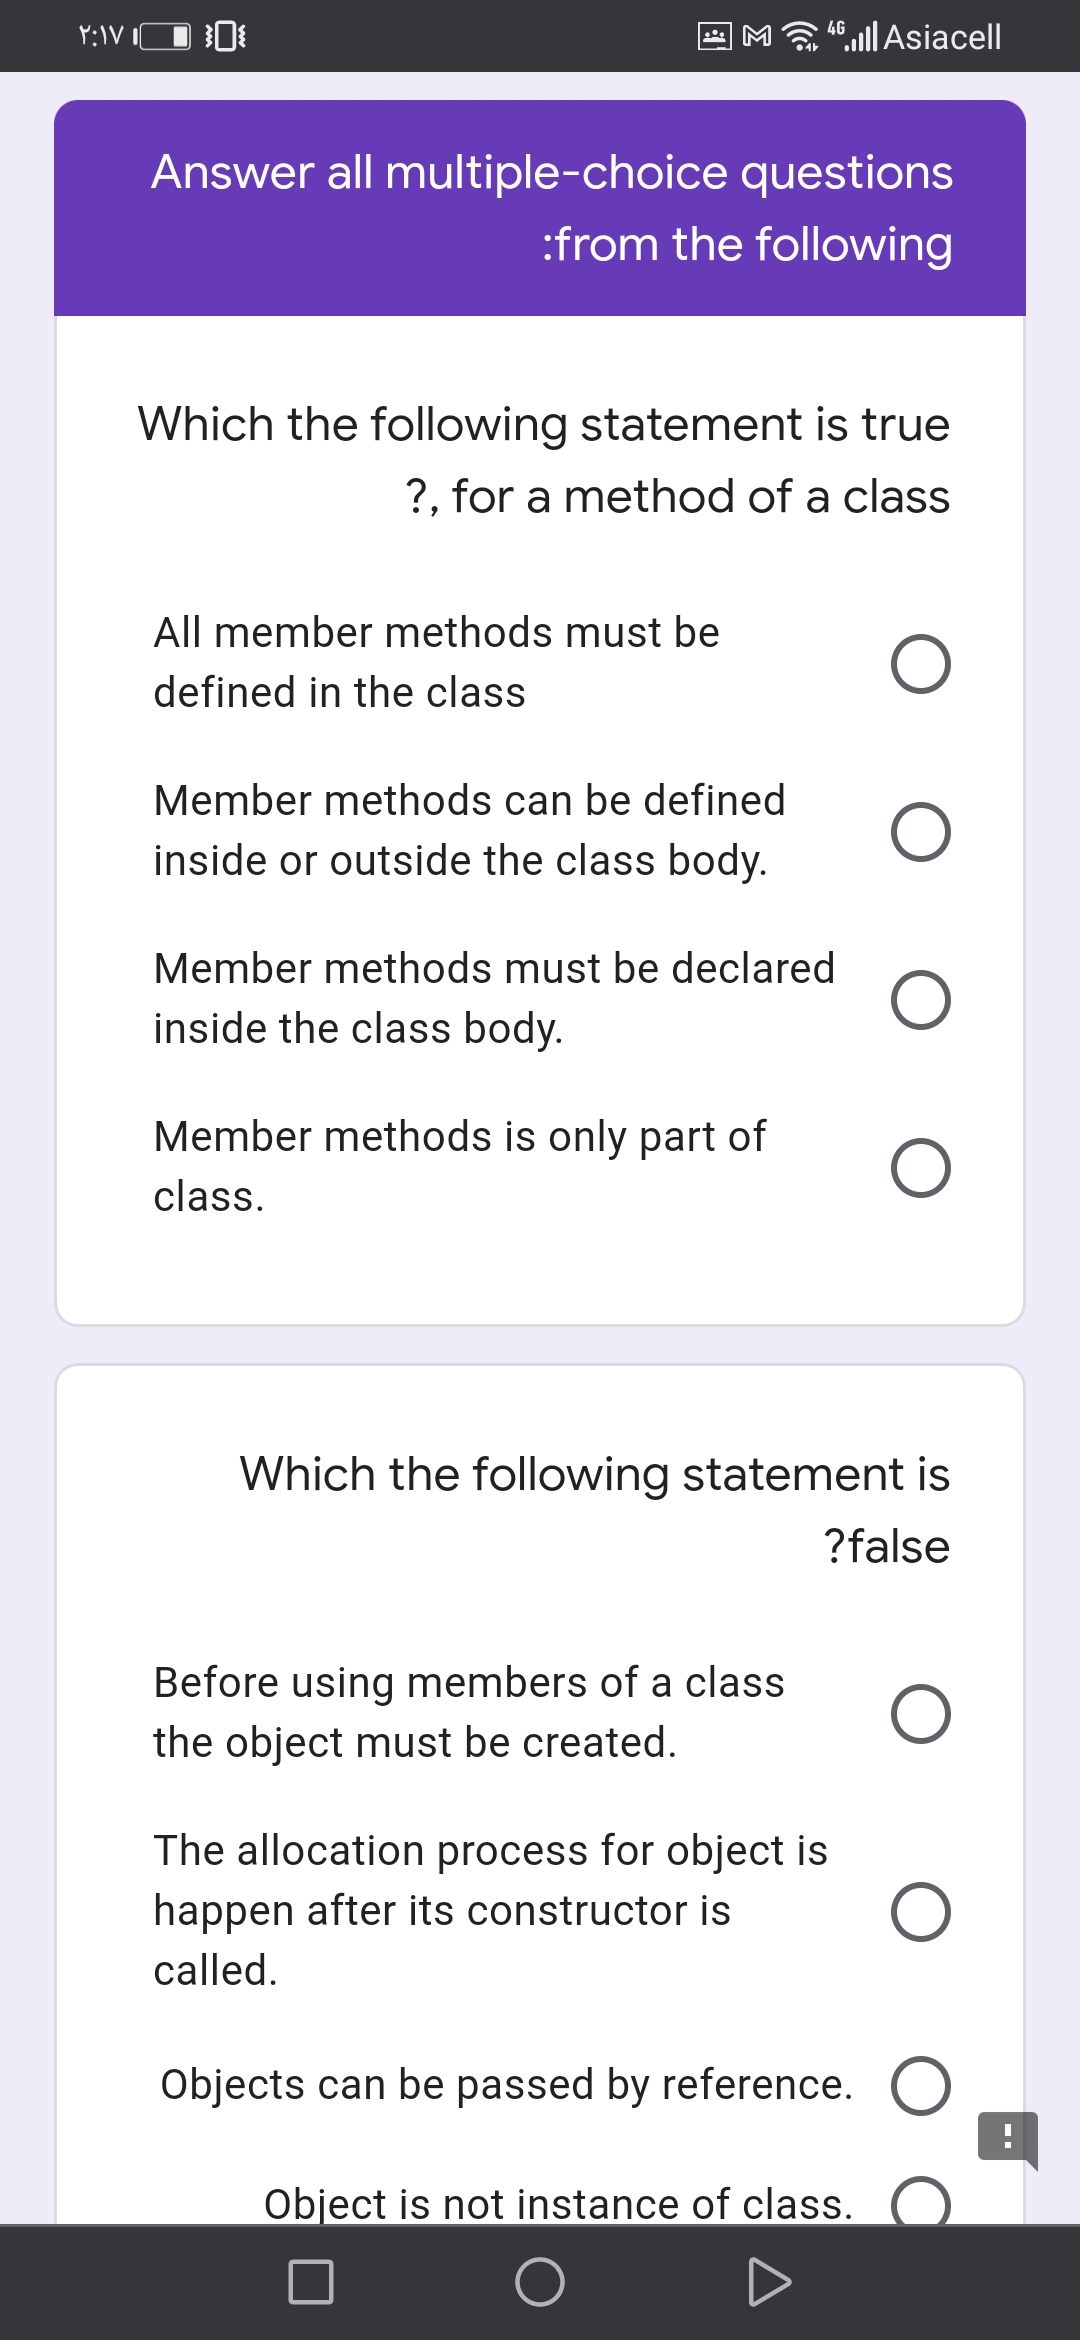 Ma |Asiacell
4G
Answer all multiple-choice questions
:from the following
Which the following statement is true
?, for a method of a class
All member methods must be
defined in the class
Member methods can be defined
inside or outside the class body.
Member methods must be declared
inside the class body.
Member methods is only part of
class.
Which the following statement is
?false
Before using members of a class
the object must be created.
The allocation process for object is
happen after its constructor is
called.
Objects can be passed by reference. O
Object is not instance of class.
